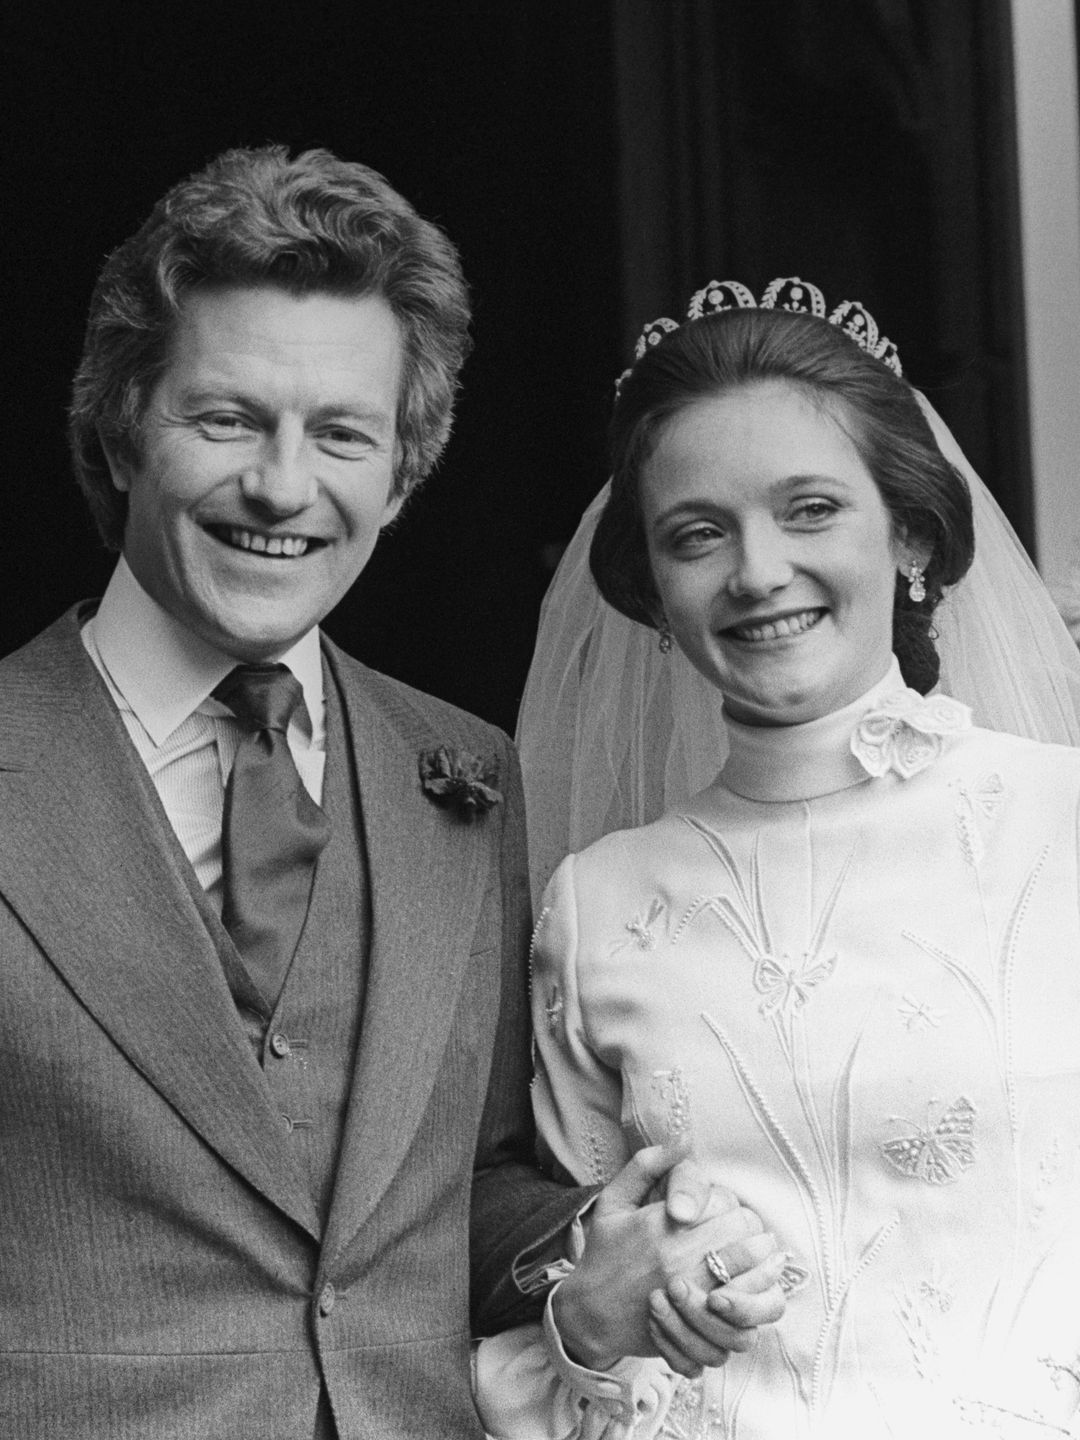 The Earl of Lichfield and Lady Leonora Grosvenor were married in 1975, with the aristocrat opting for this delicate diadem